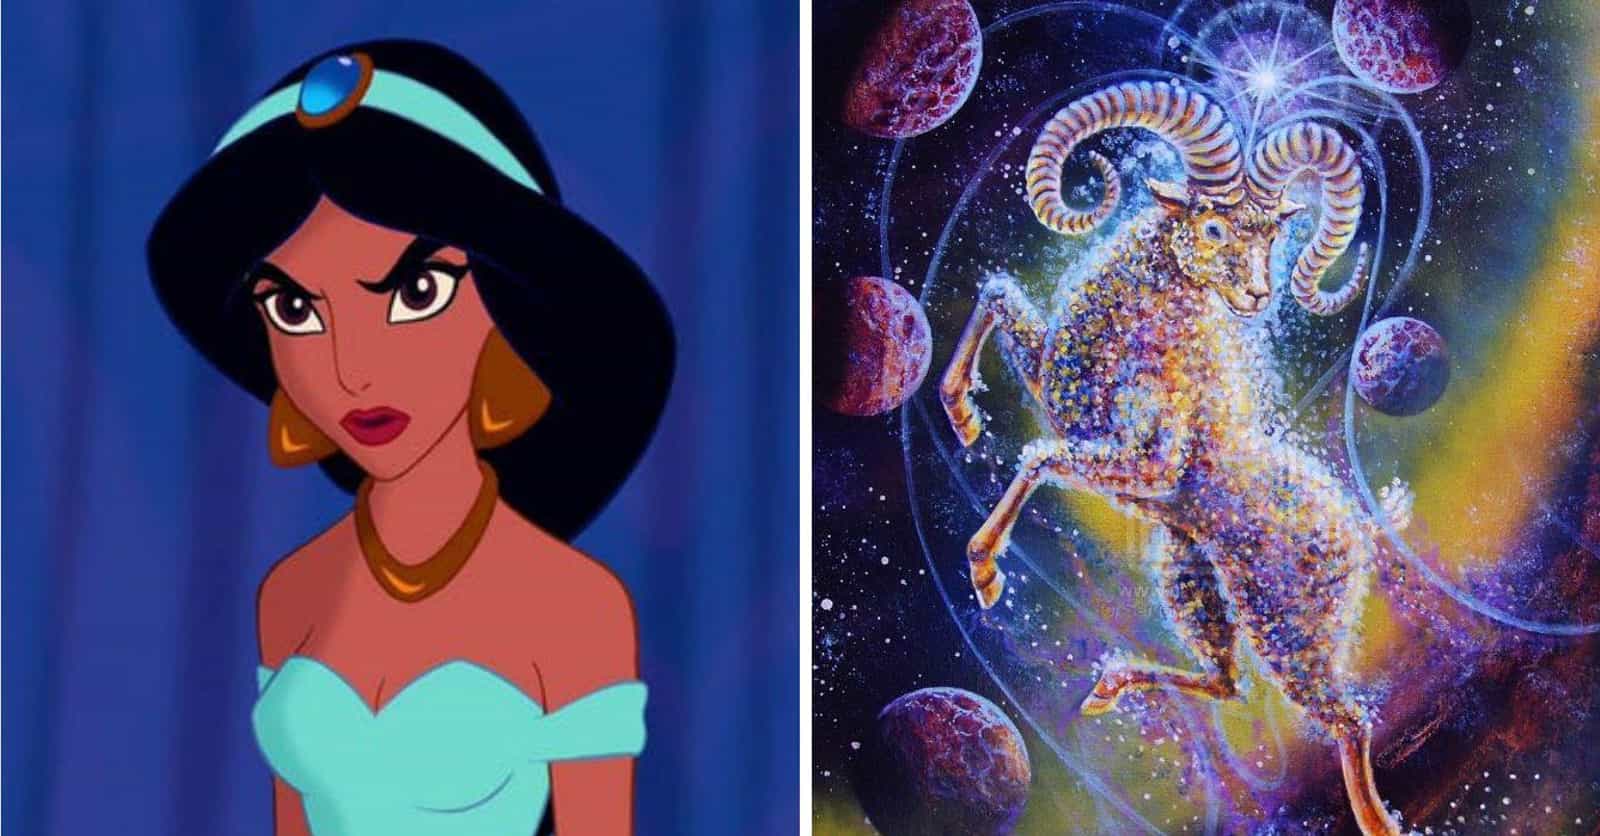 What Disney Princess Matches Your Zodiac Sign?